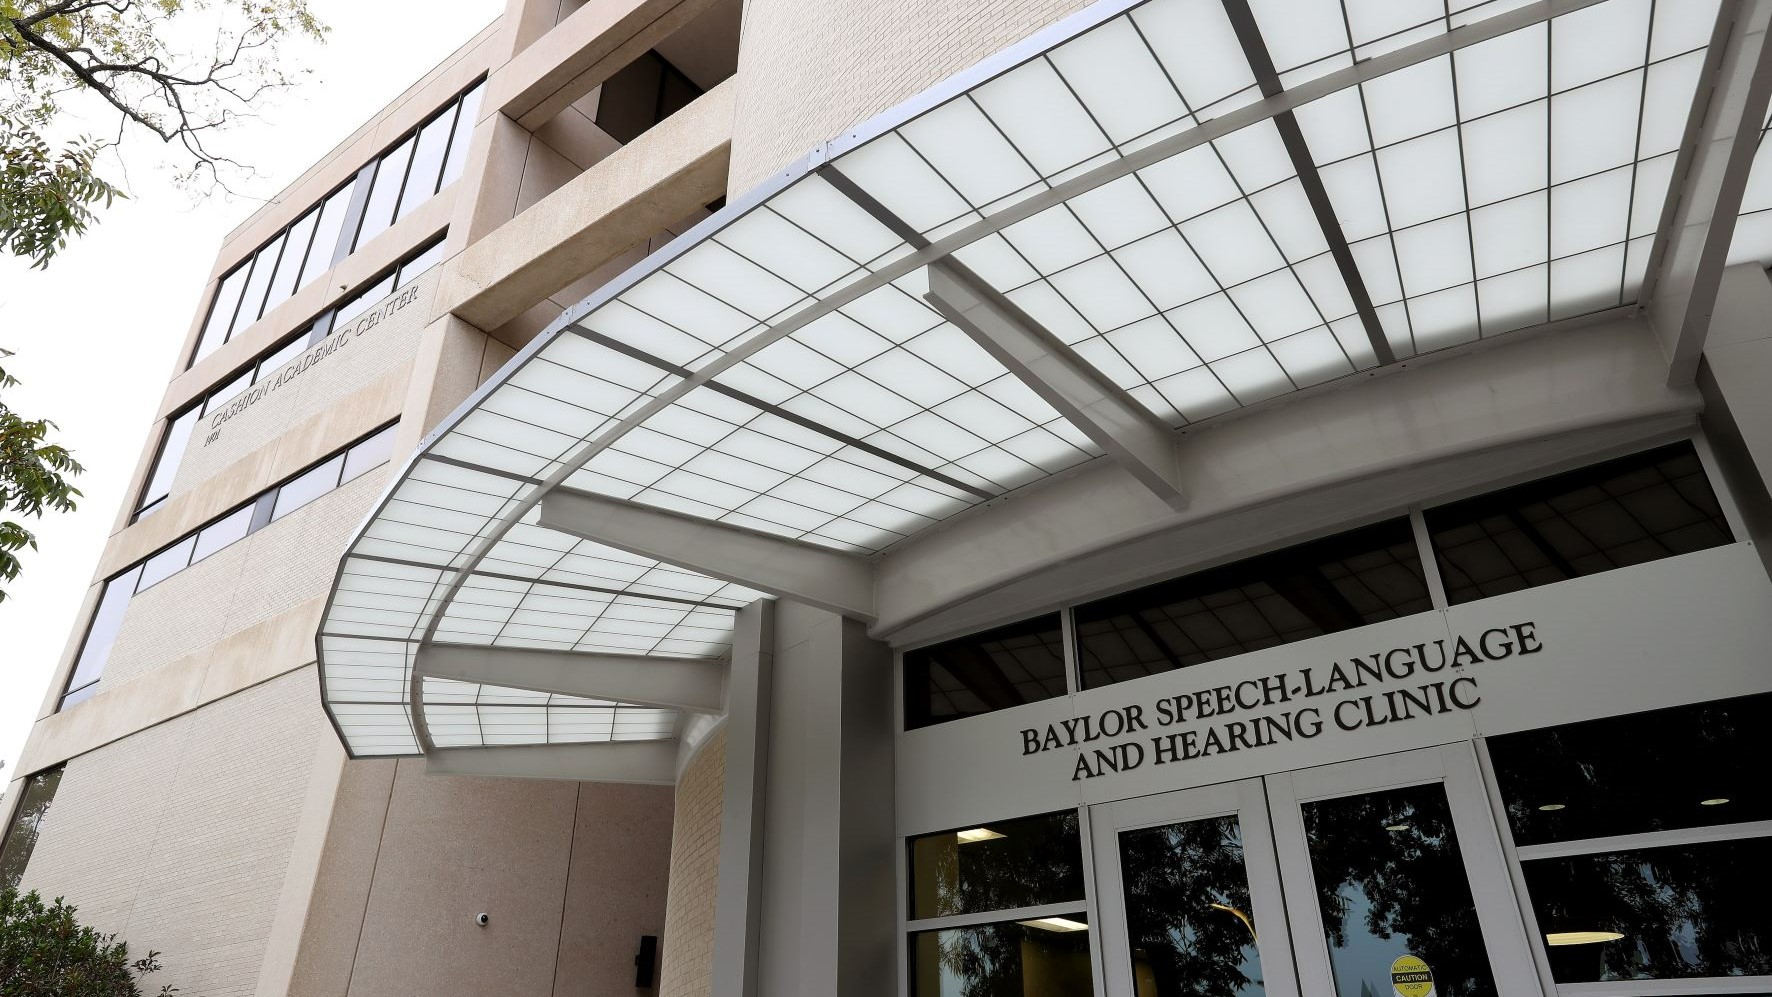 Baylor Speech-Language and Hearing Clinic